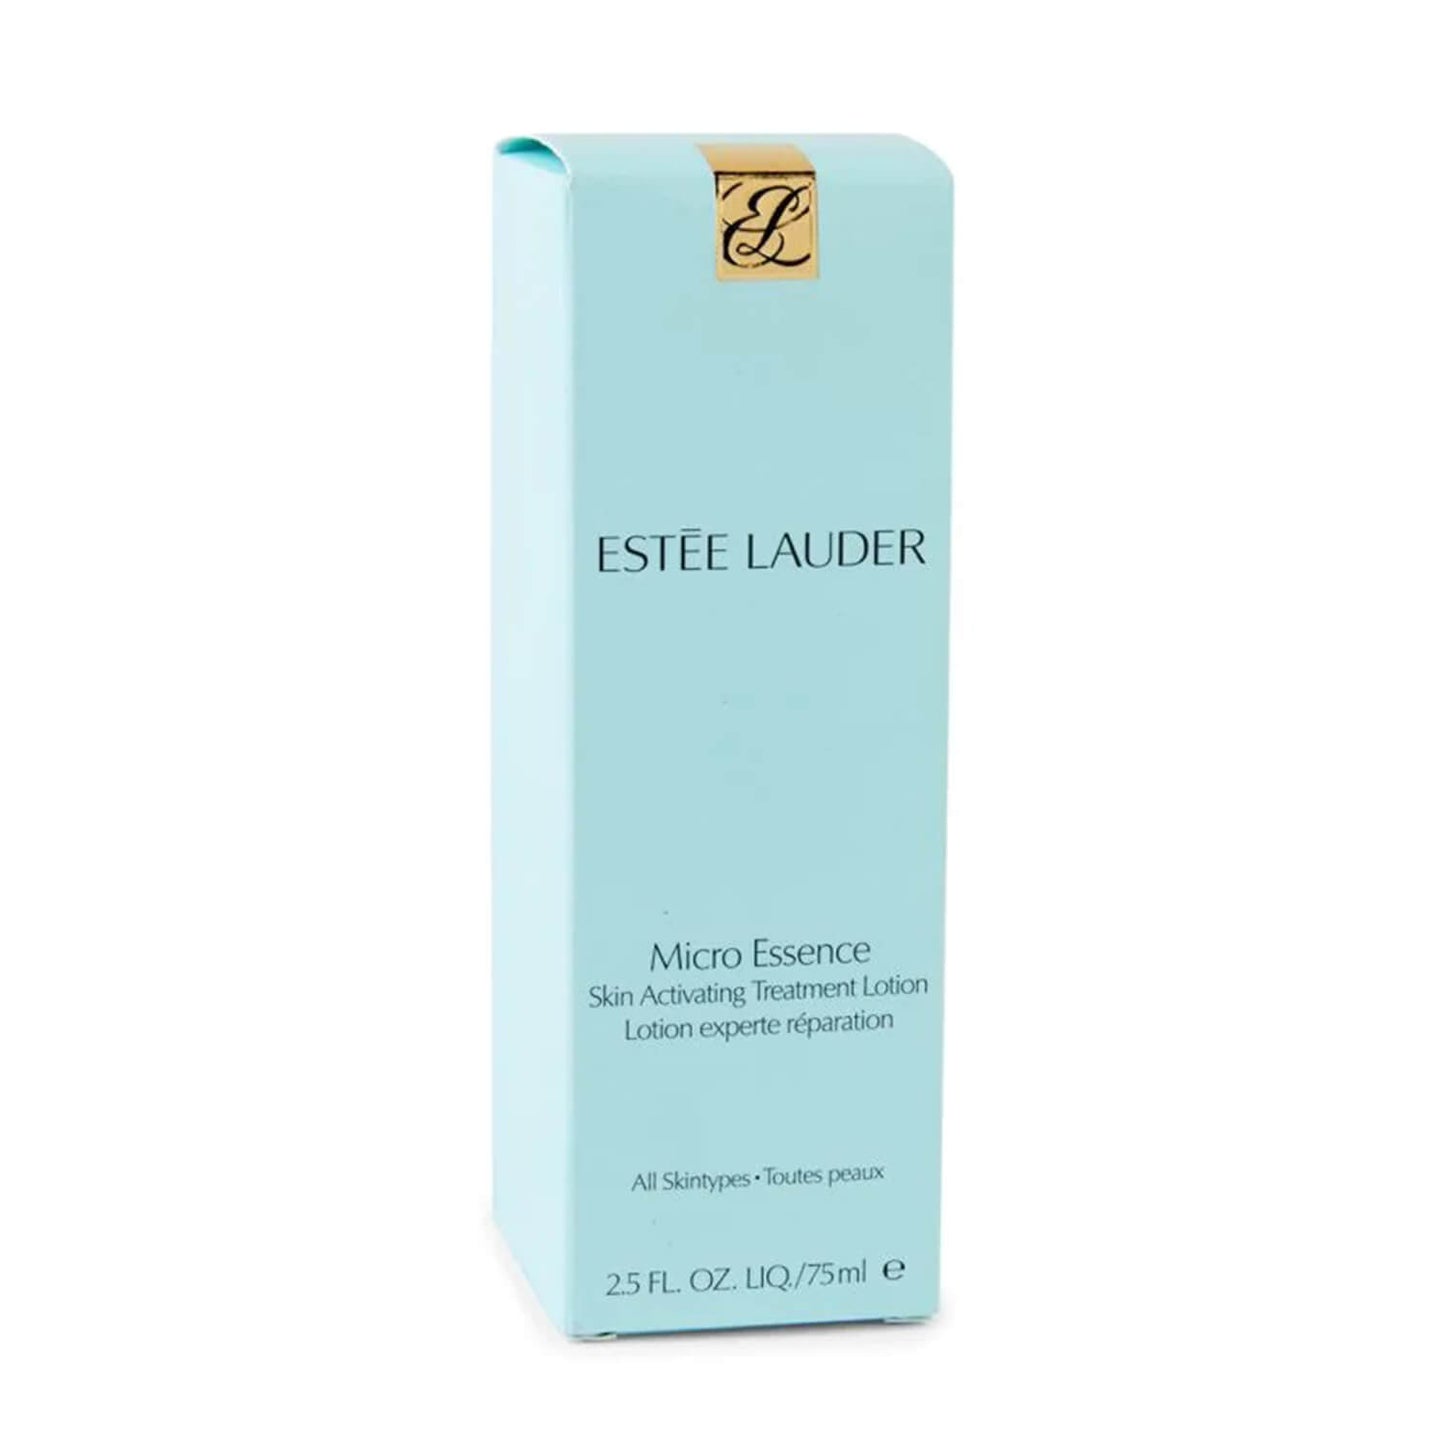 estee lauder micro essence skin lotion available for cash on delivery in Pakistanshop estee lauder micro essence skin lotion available at heygirl.pk for cash on delivery in Pakistan